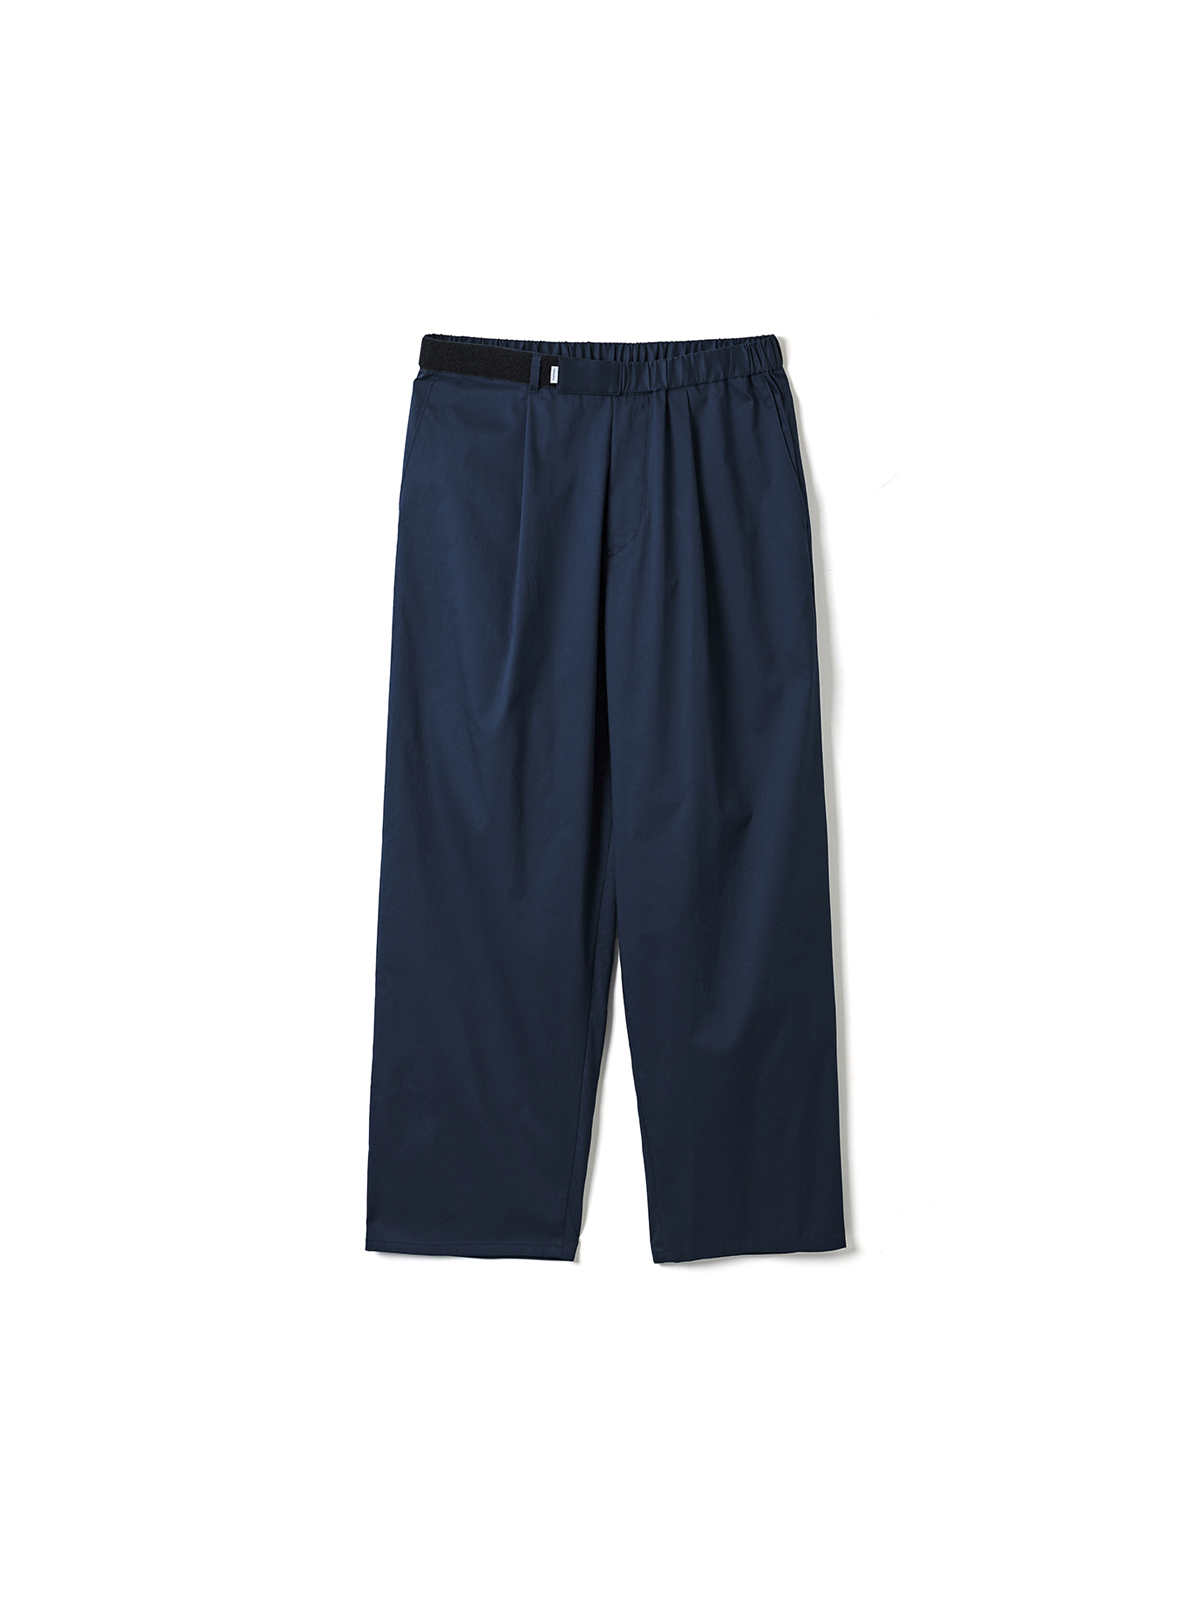 SOLOTEX TWILL WIDE CHEF PANTS (NAVY)